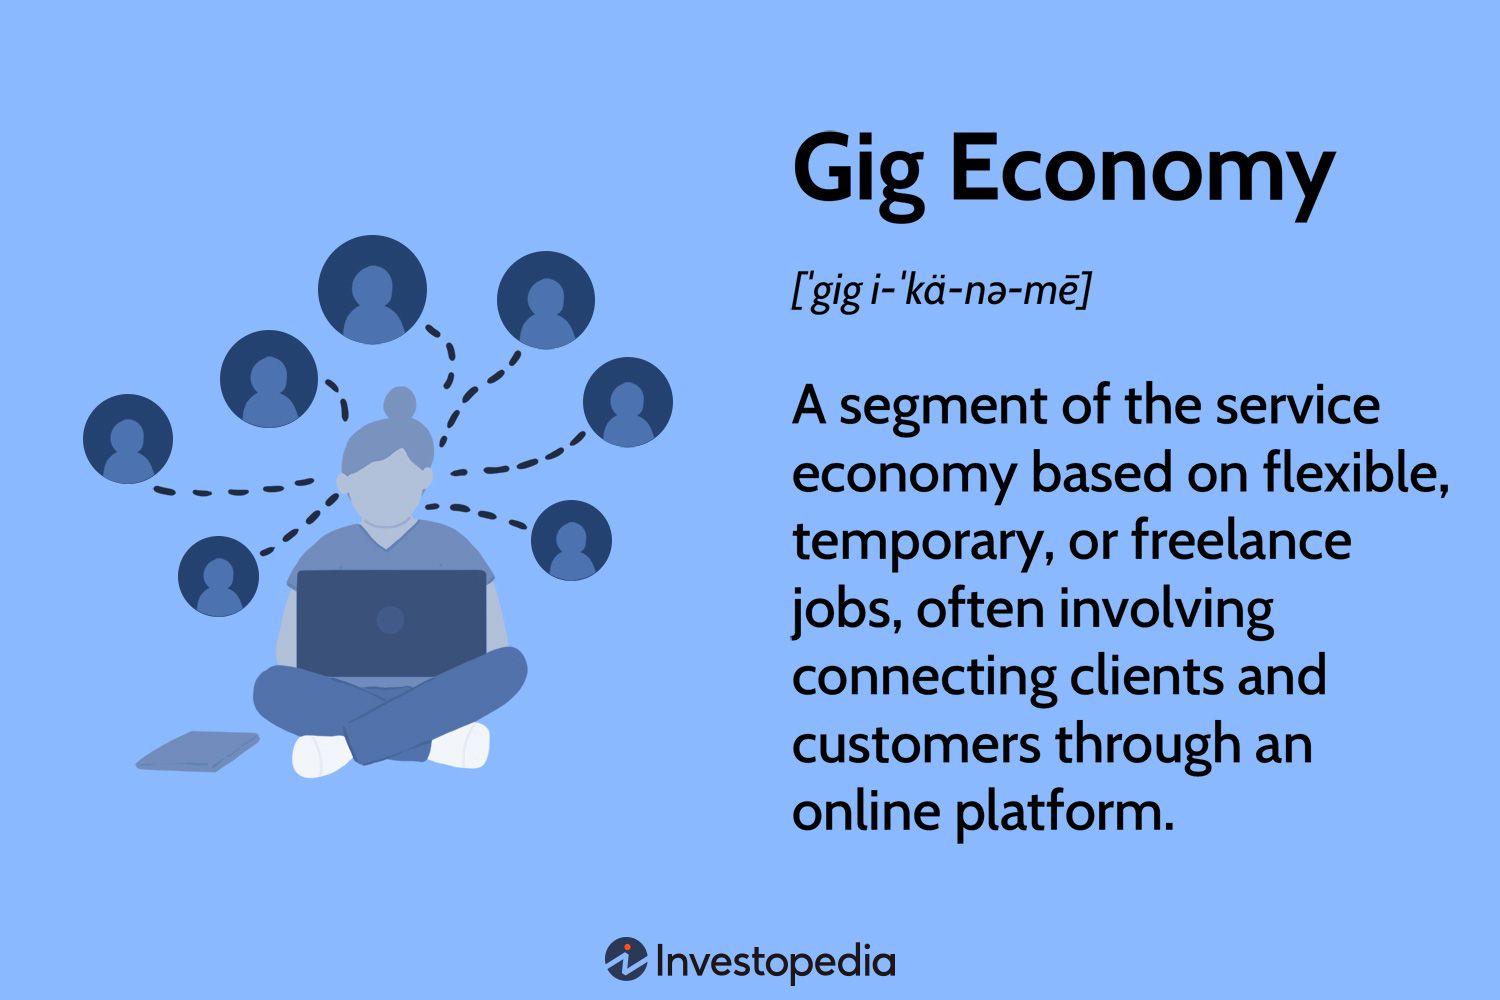 How Will Working in the Gig Economy Affect Your Job Benefits